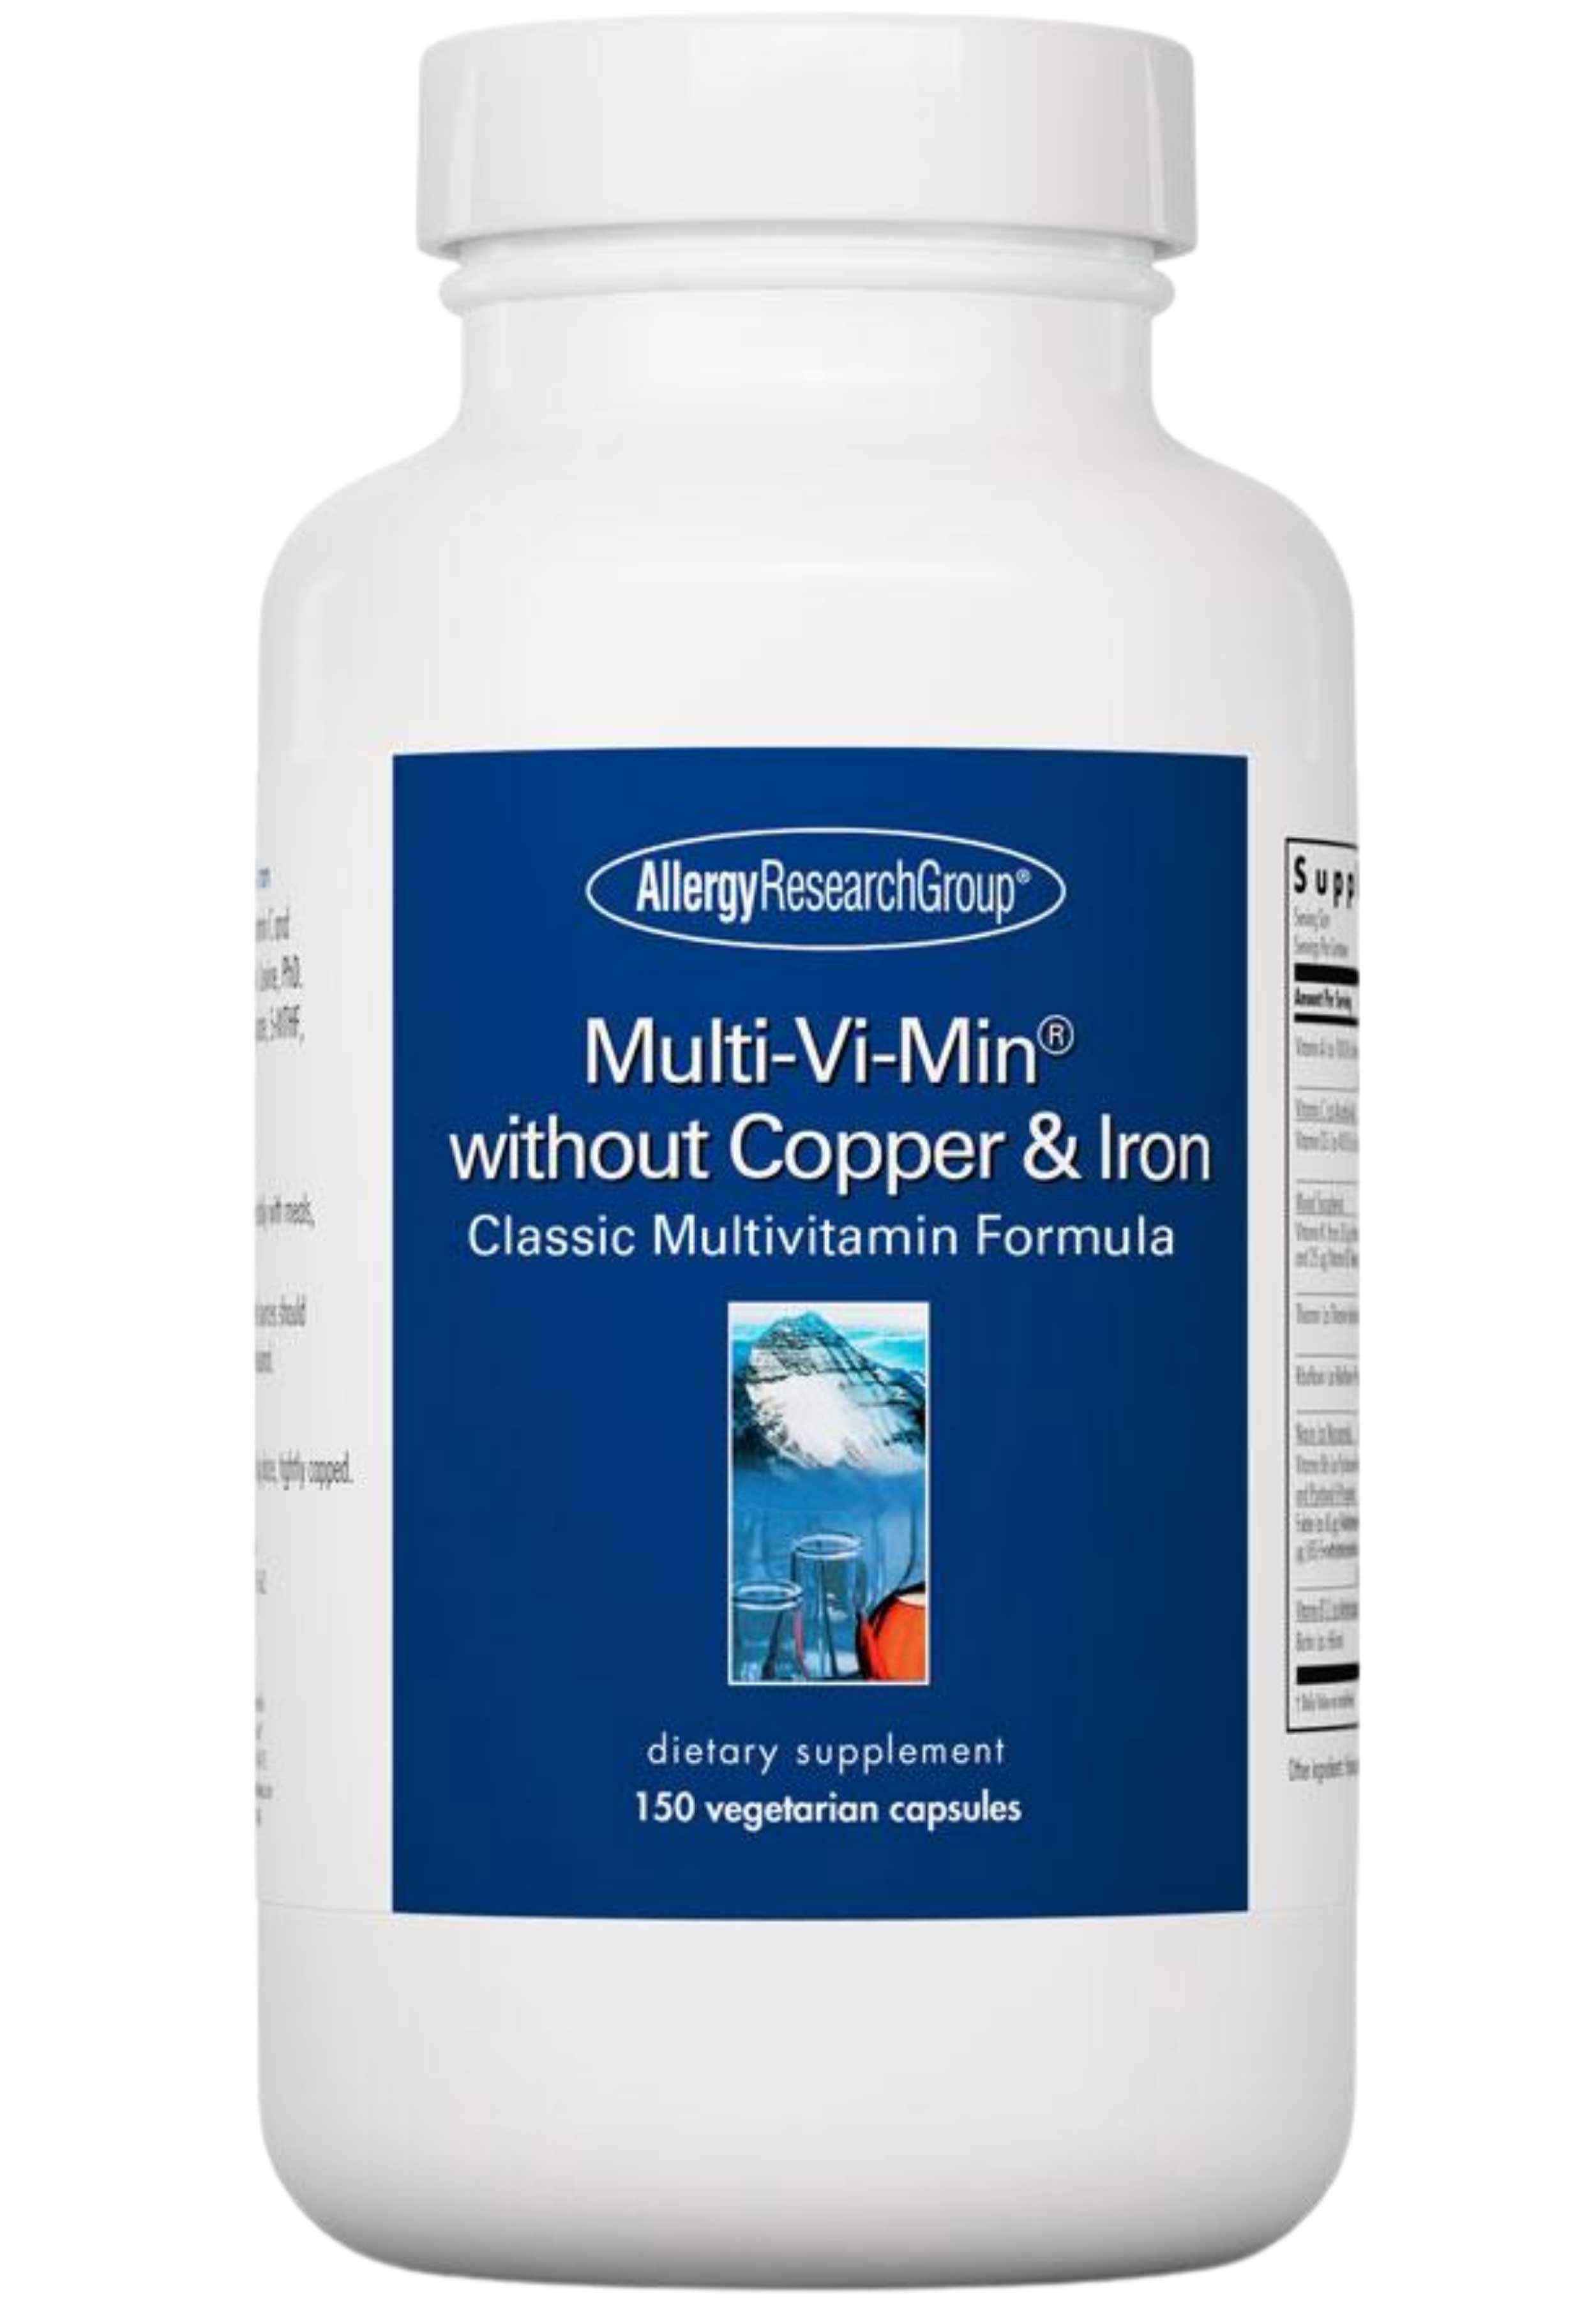 Allergy Research Group Multi-Vi-Min without Copper & Iron